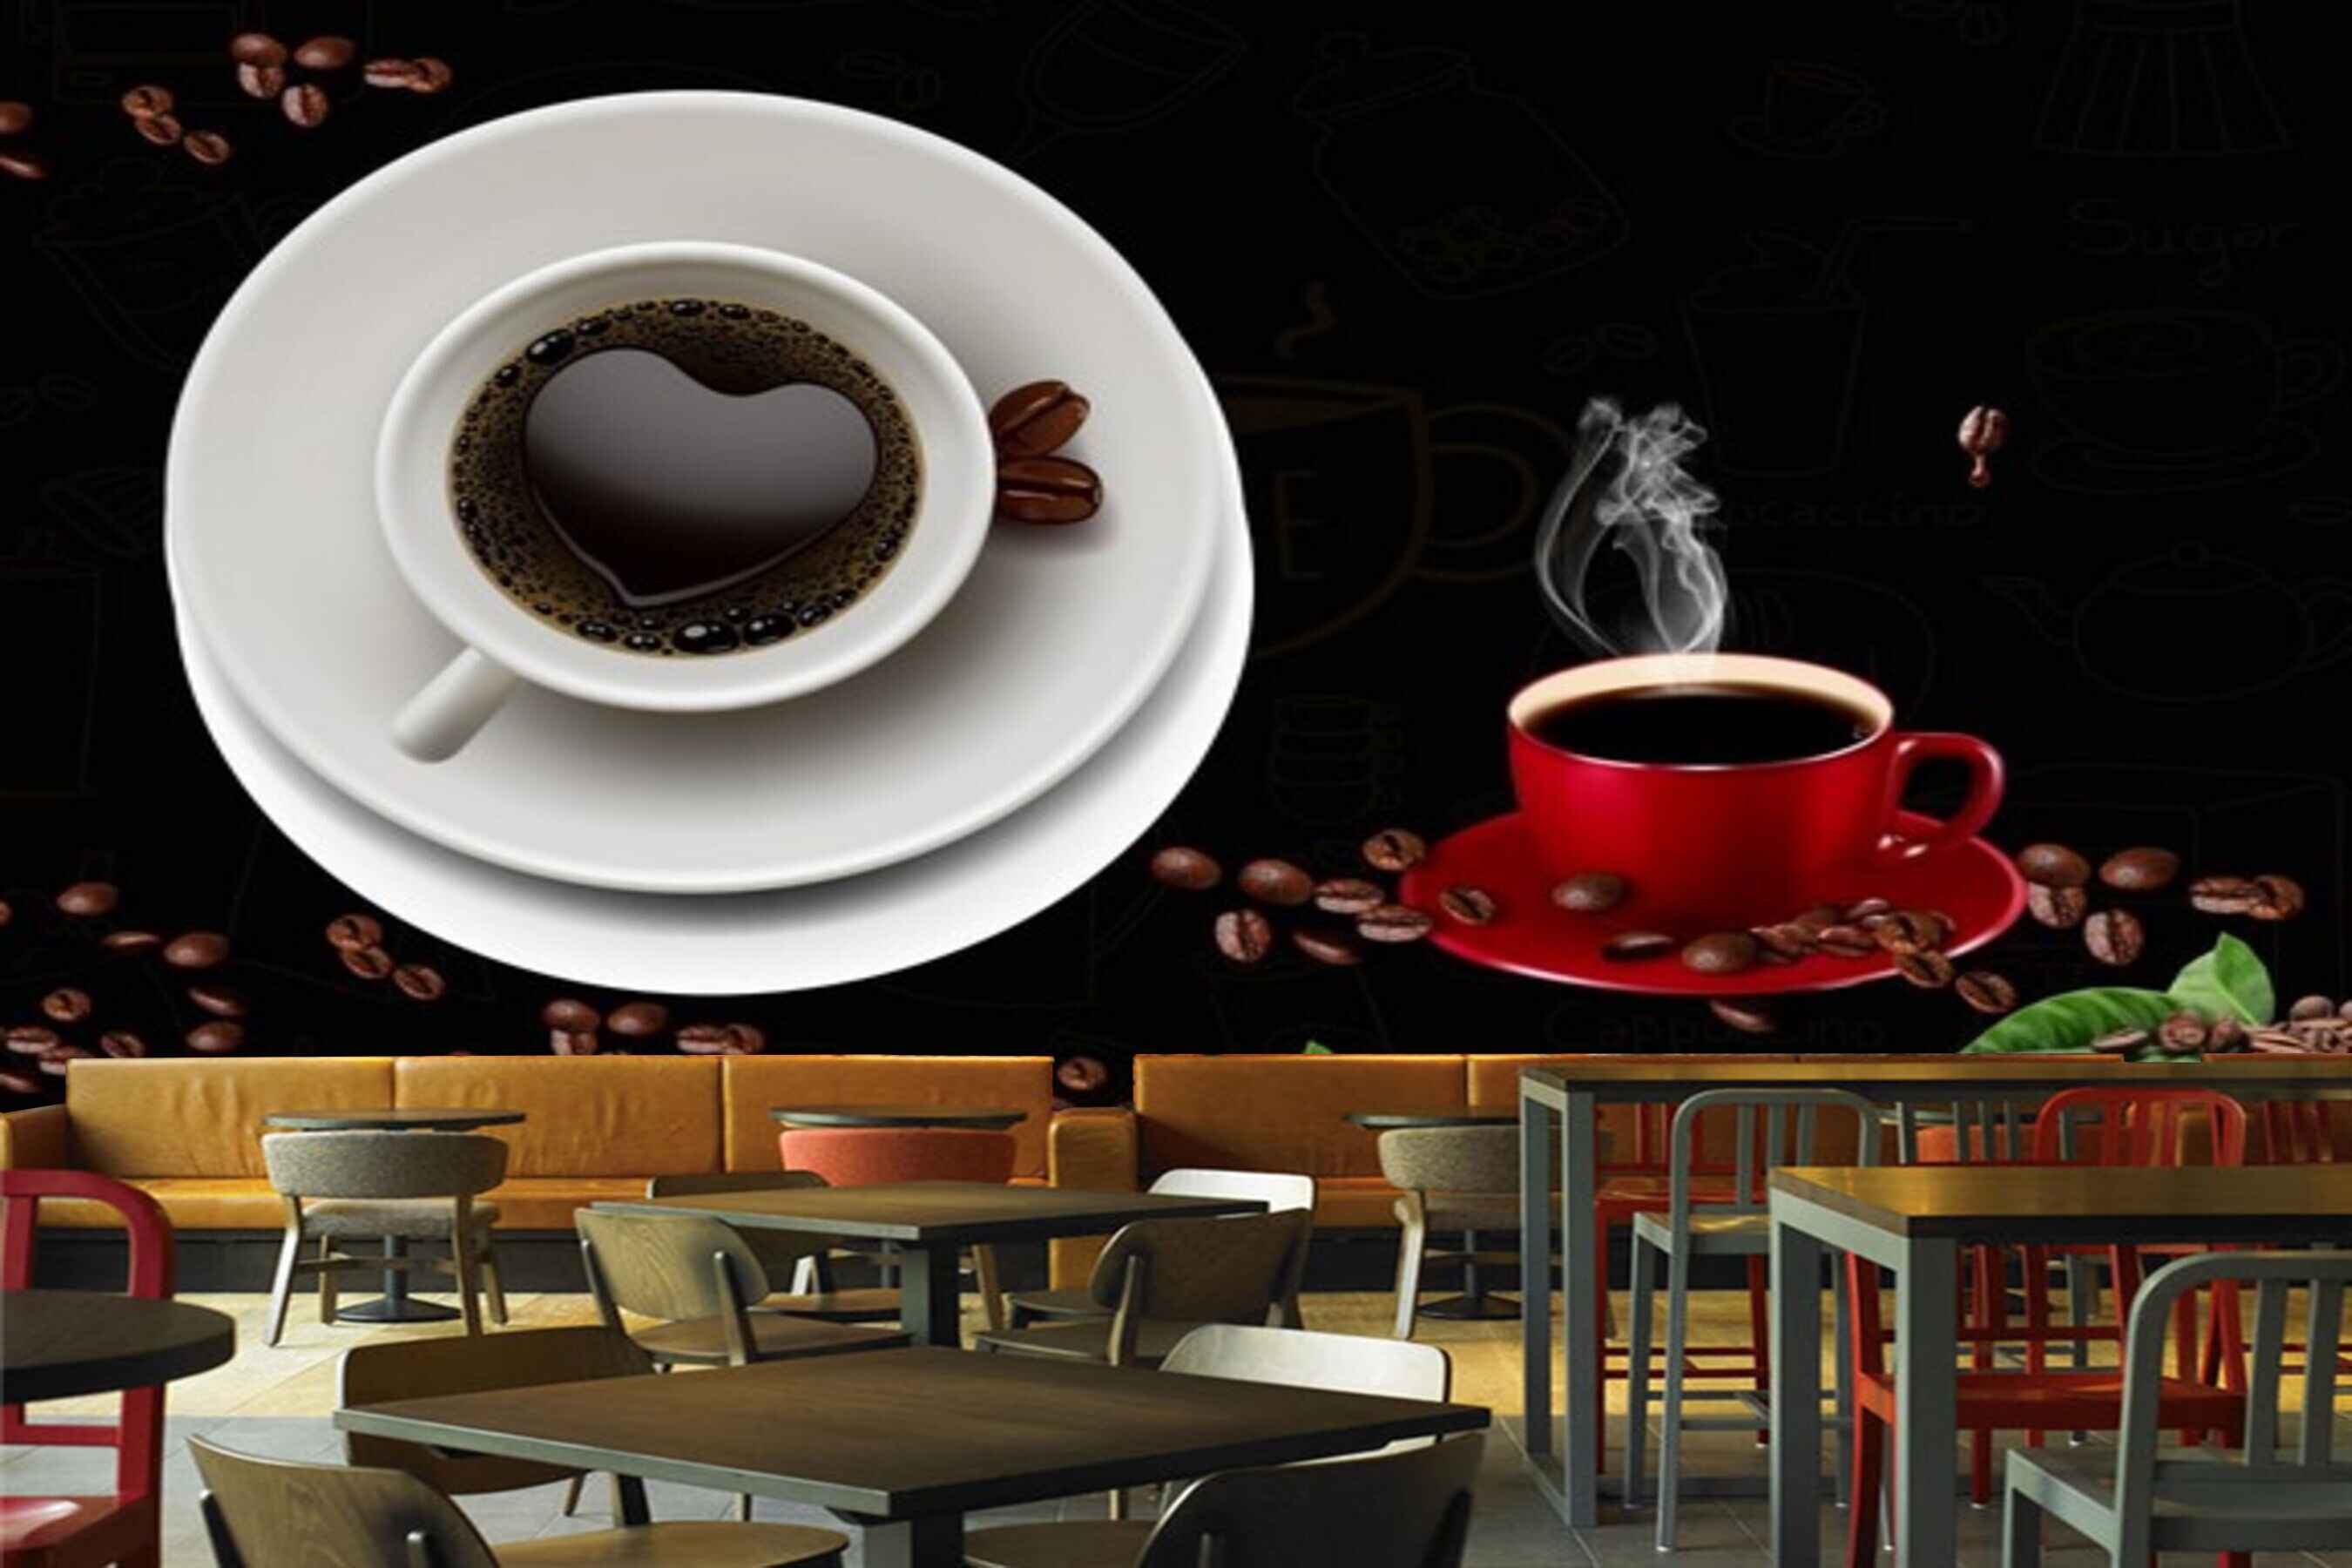 Avikalp MWZ3001 Cup Saucer Coffee Beans Leaves HD Wallpaper for Cafe Restaurant